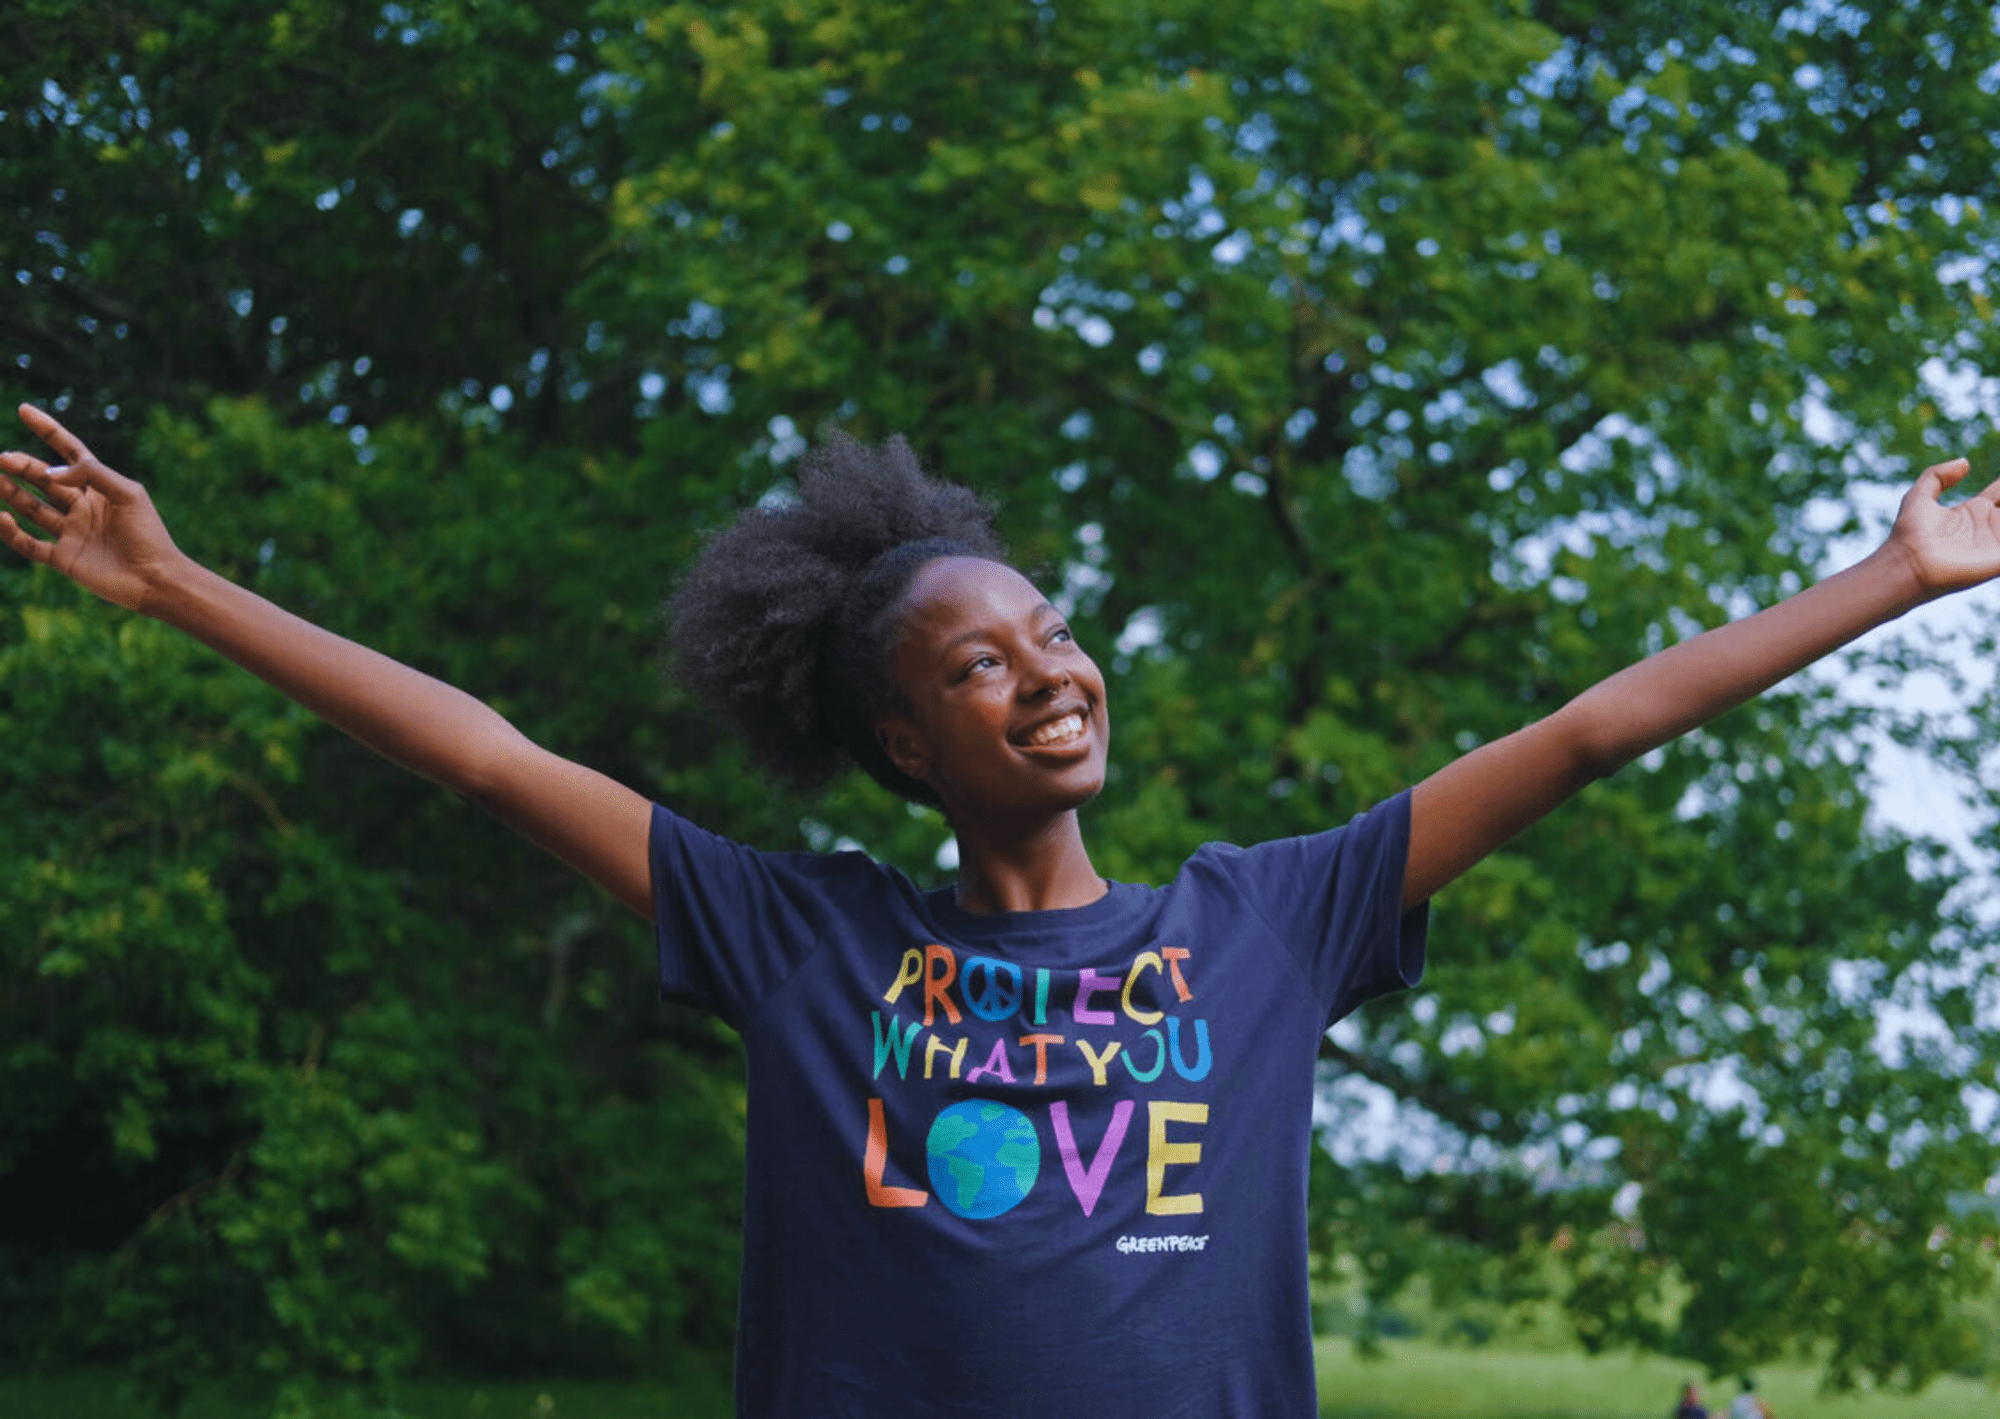 A young smiling Black woman with outstretched arms wearing a dark blue Protect What You Love T-shirt surrounded by trees